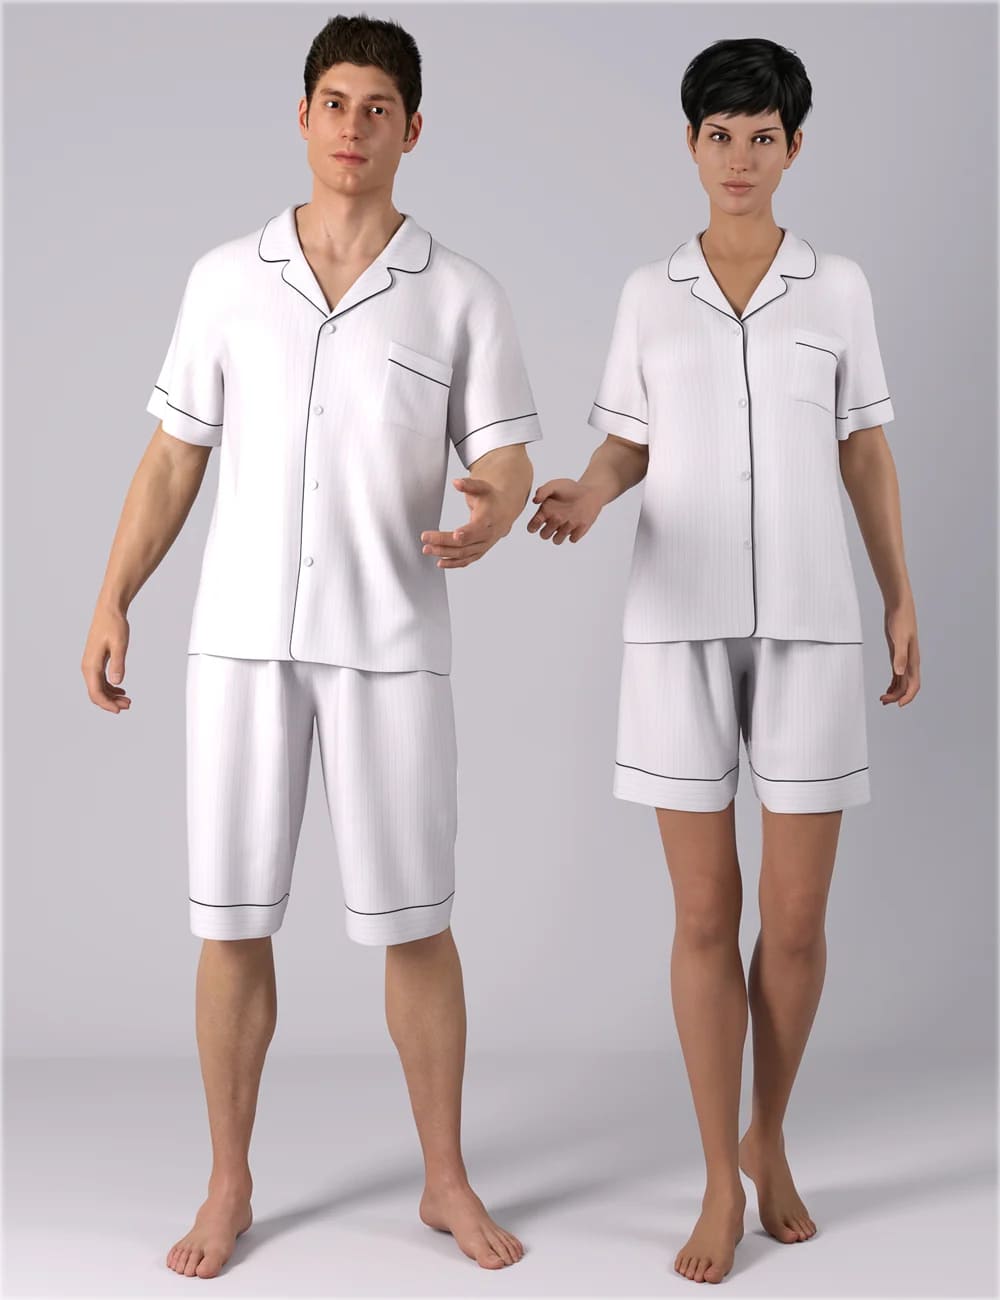 dForce HnC Summer Pajamas Outfits for Genesis 8.1 Females and Males_DAZ3D下载站